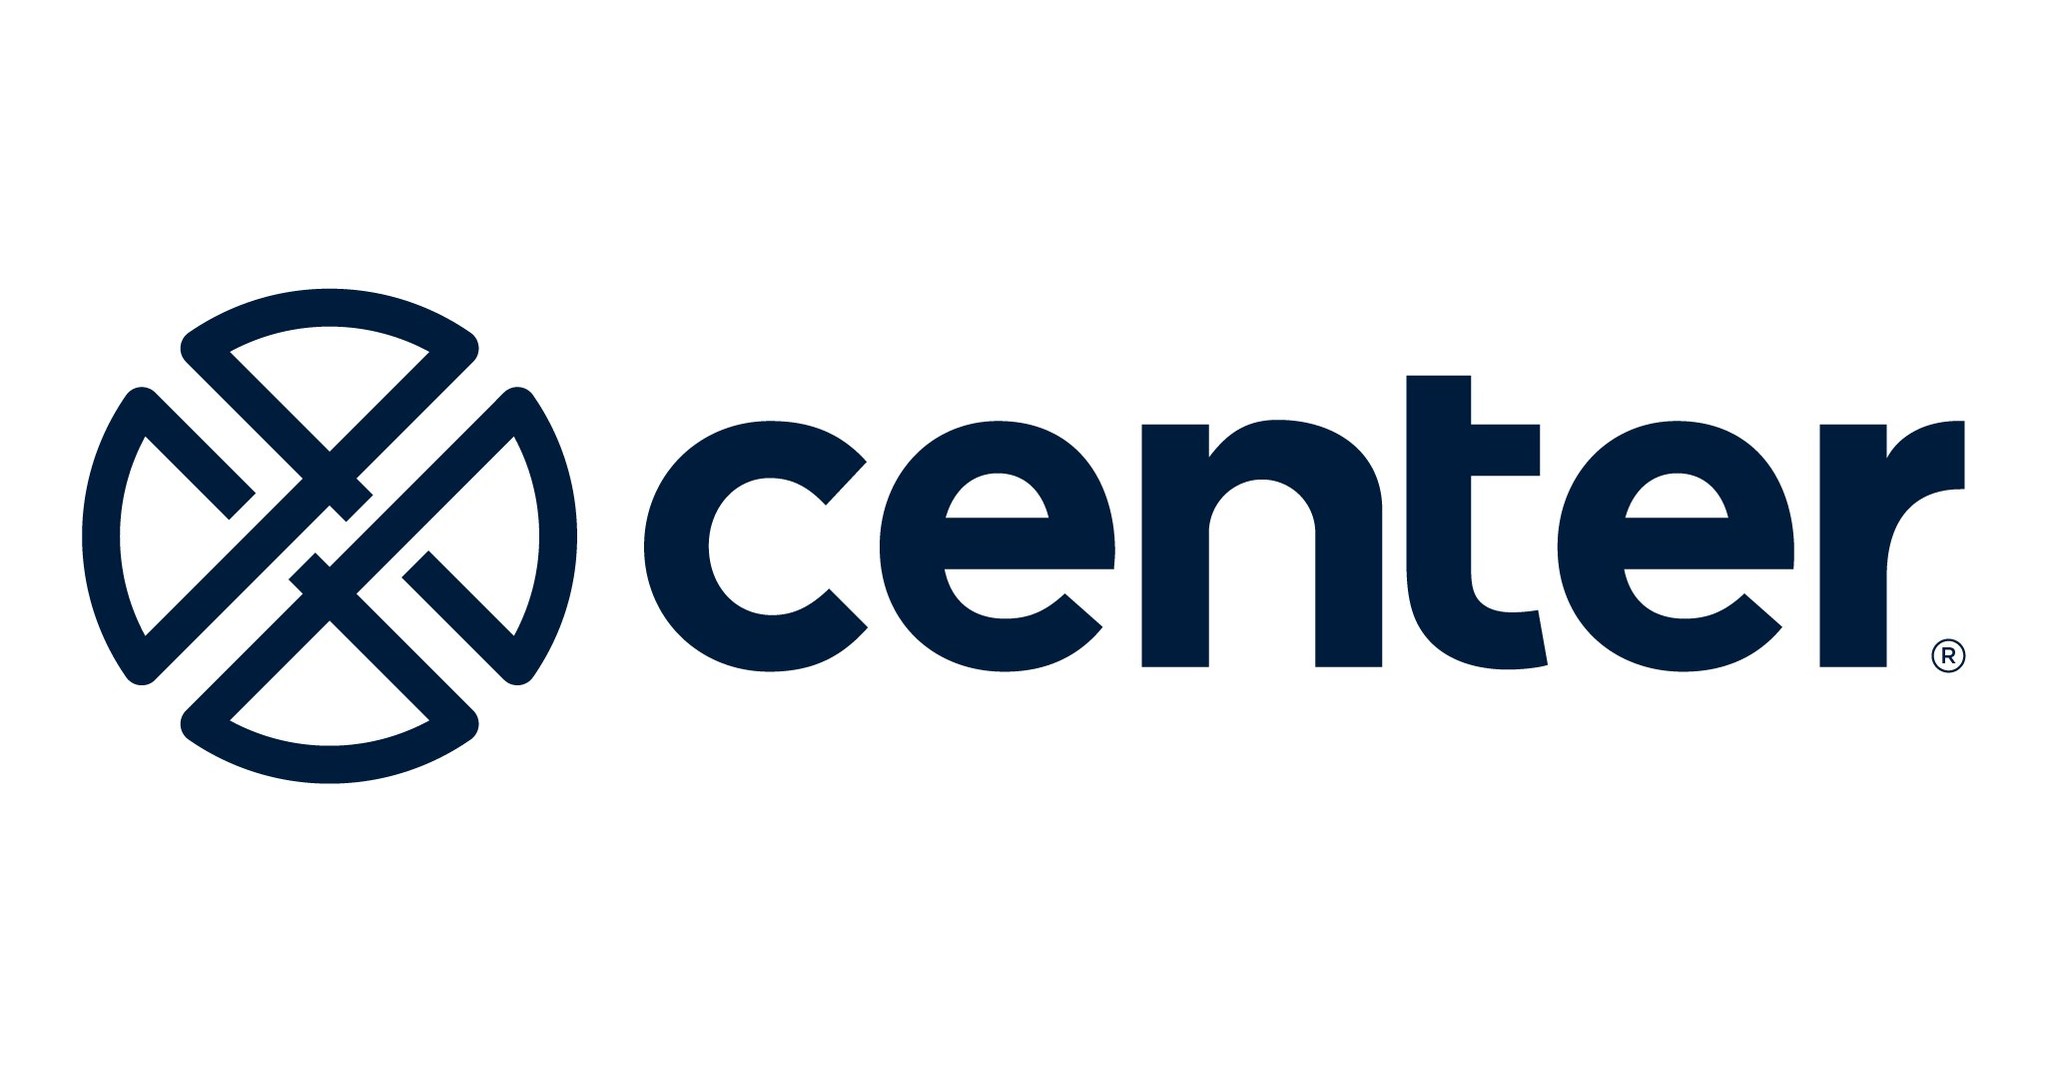 Expense Management Software Company Center Raises Additional $15M in Series B Bringing Total Capital Raised to More Than $110M